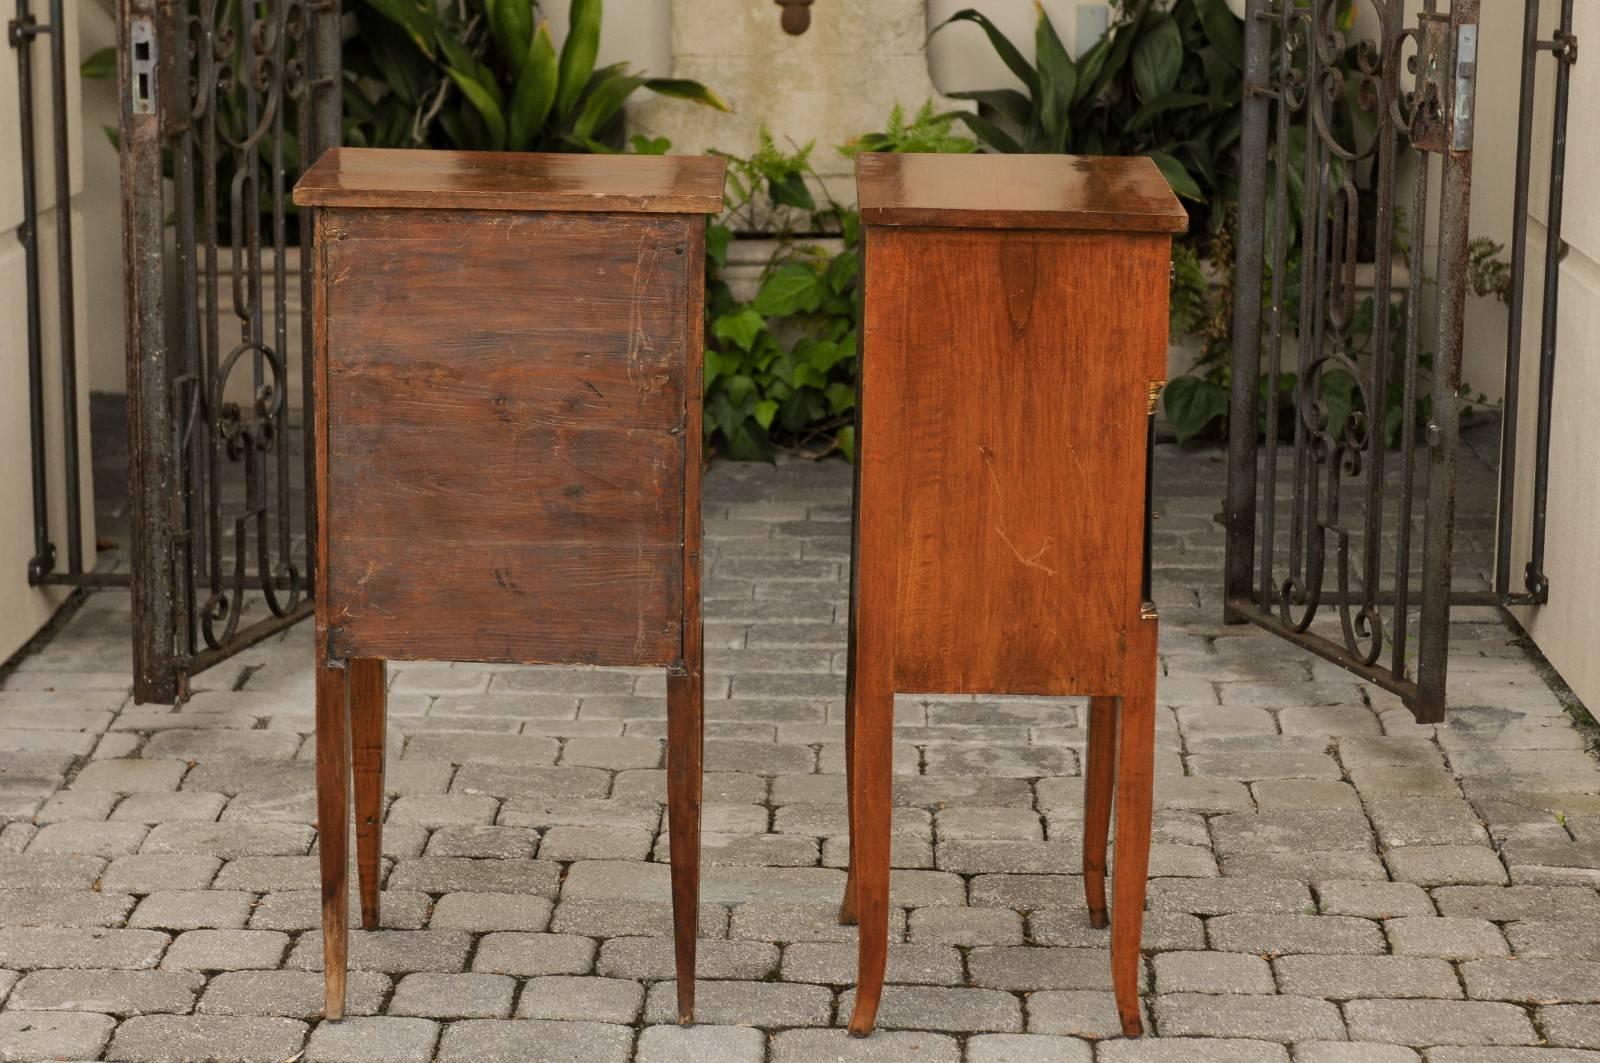 Pair of 1840s Biedermeier Walnut Stands with Drawer, Door and Semi-Columns For Sale 2